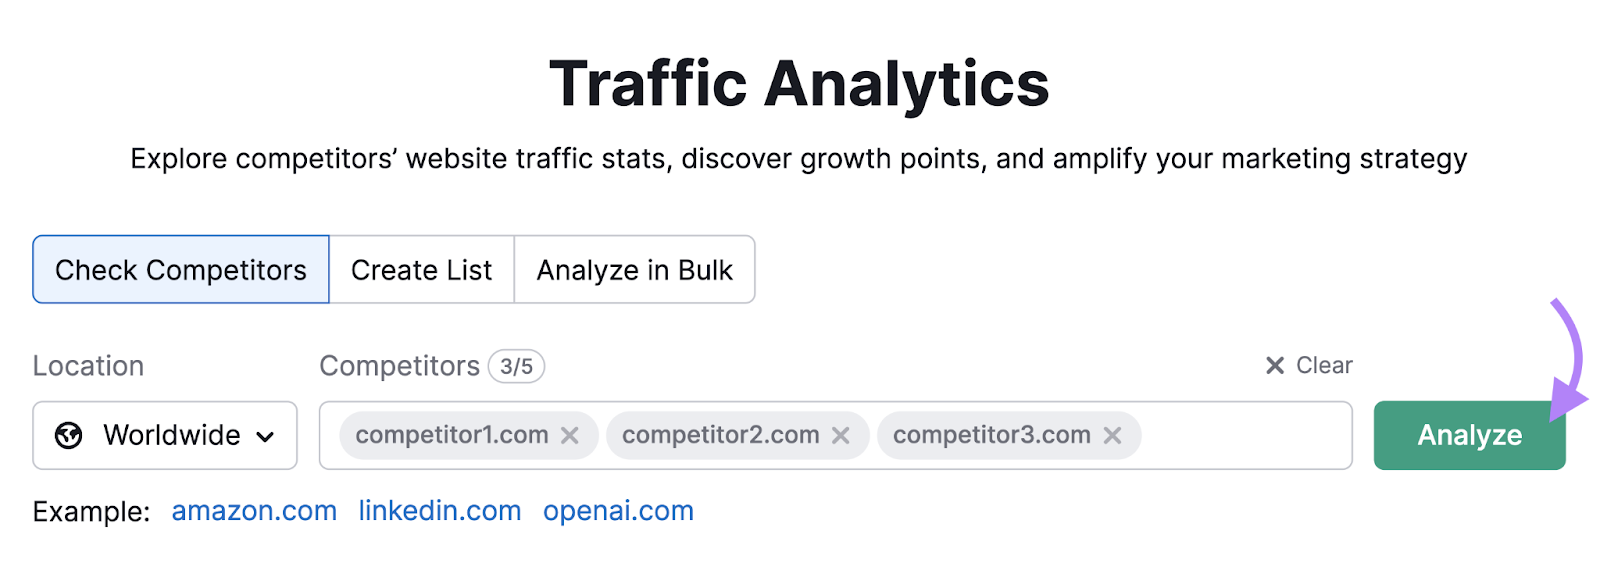 Search bar in Traffic Analytics tool